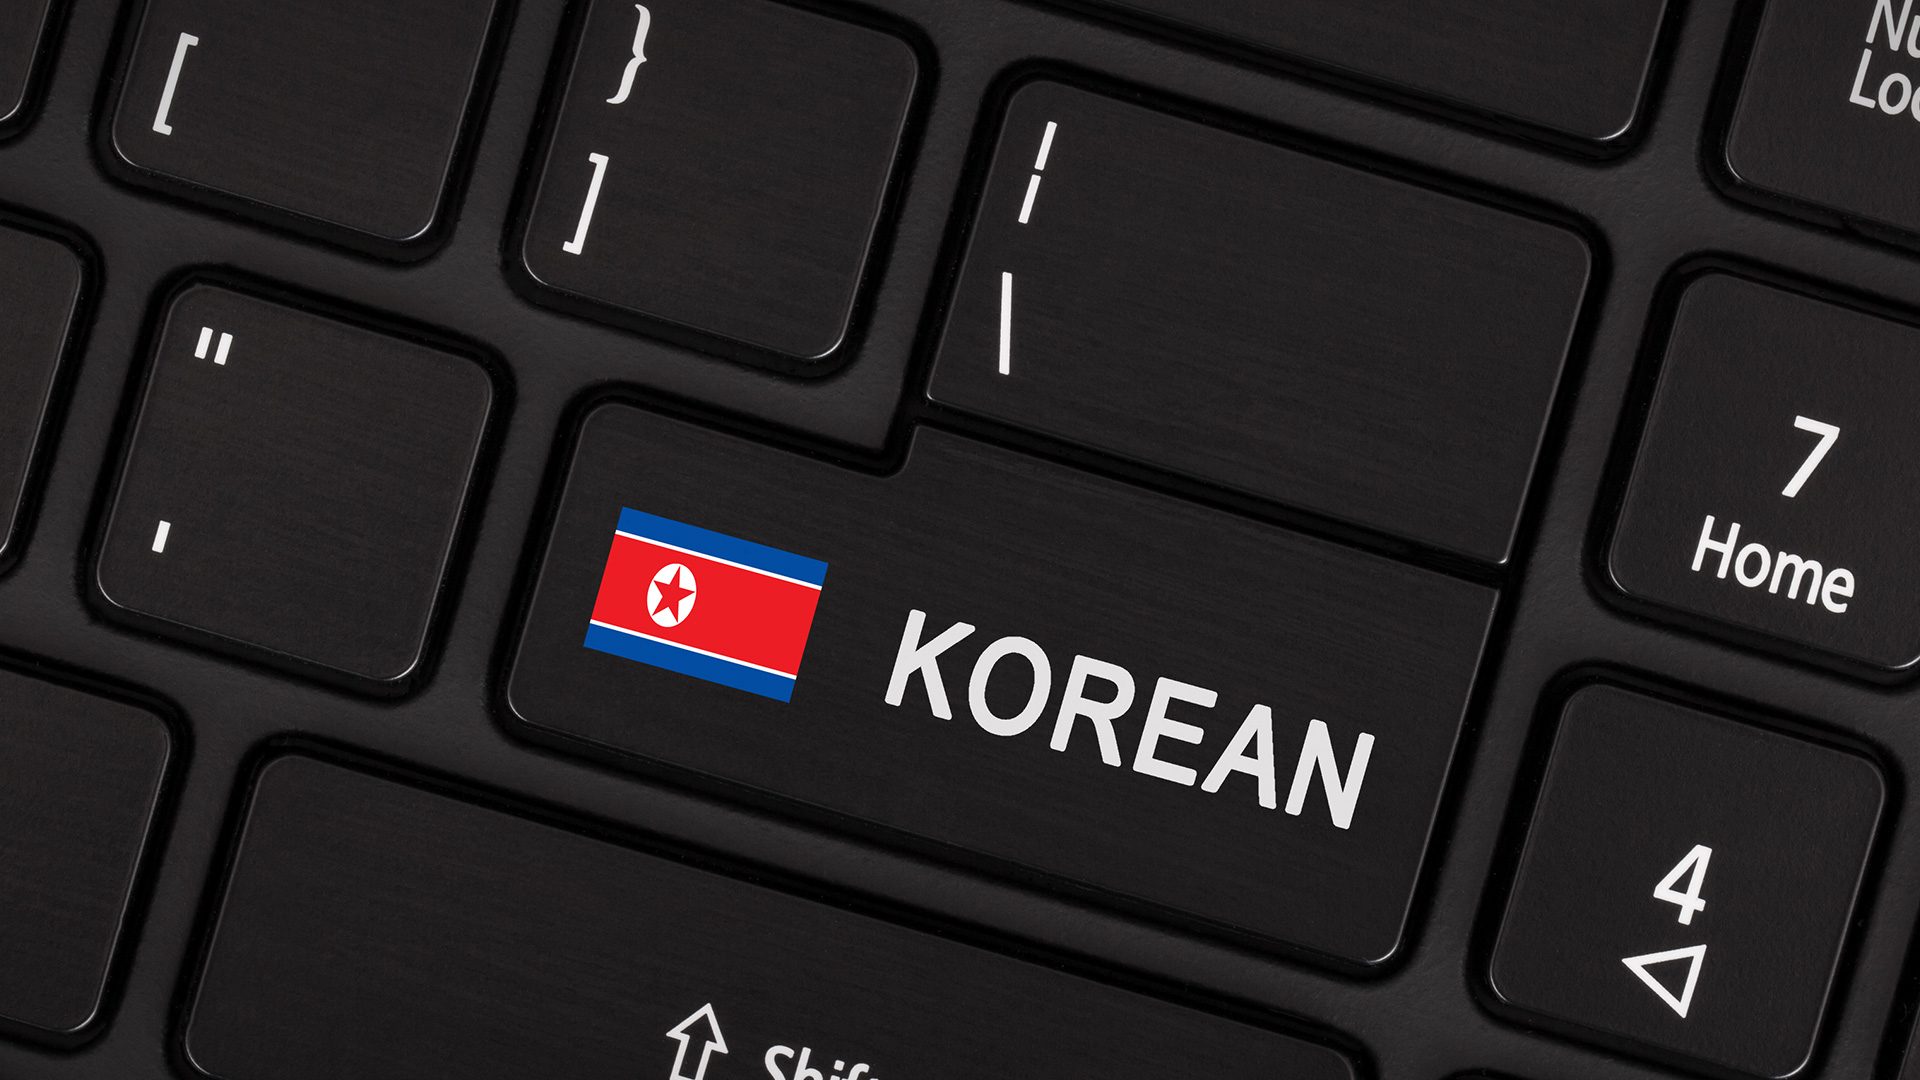 US, South Korea, Japan to launch consultative group on North’s cyber threats